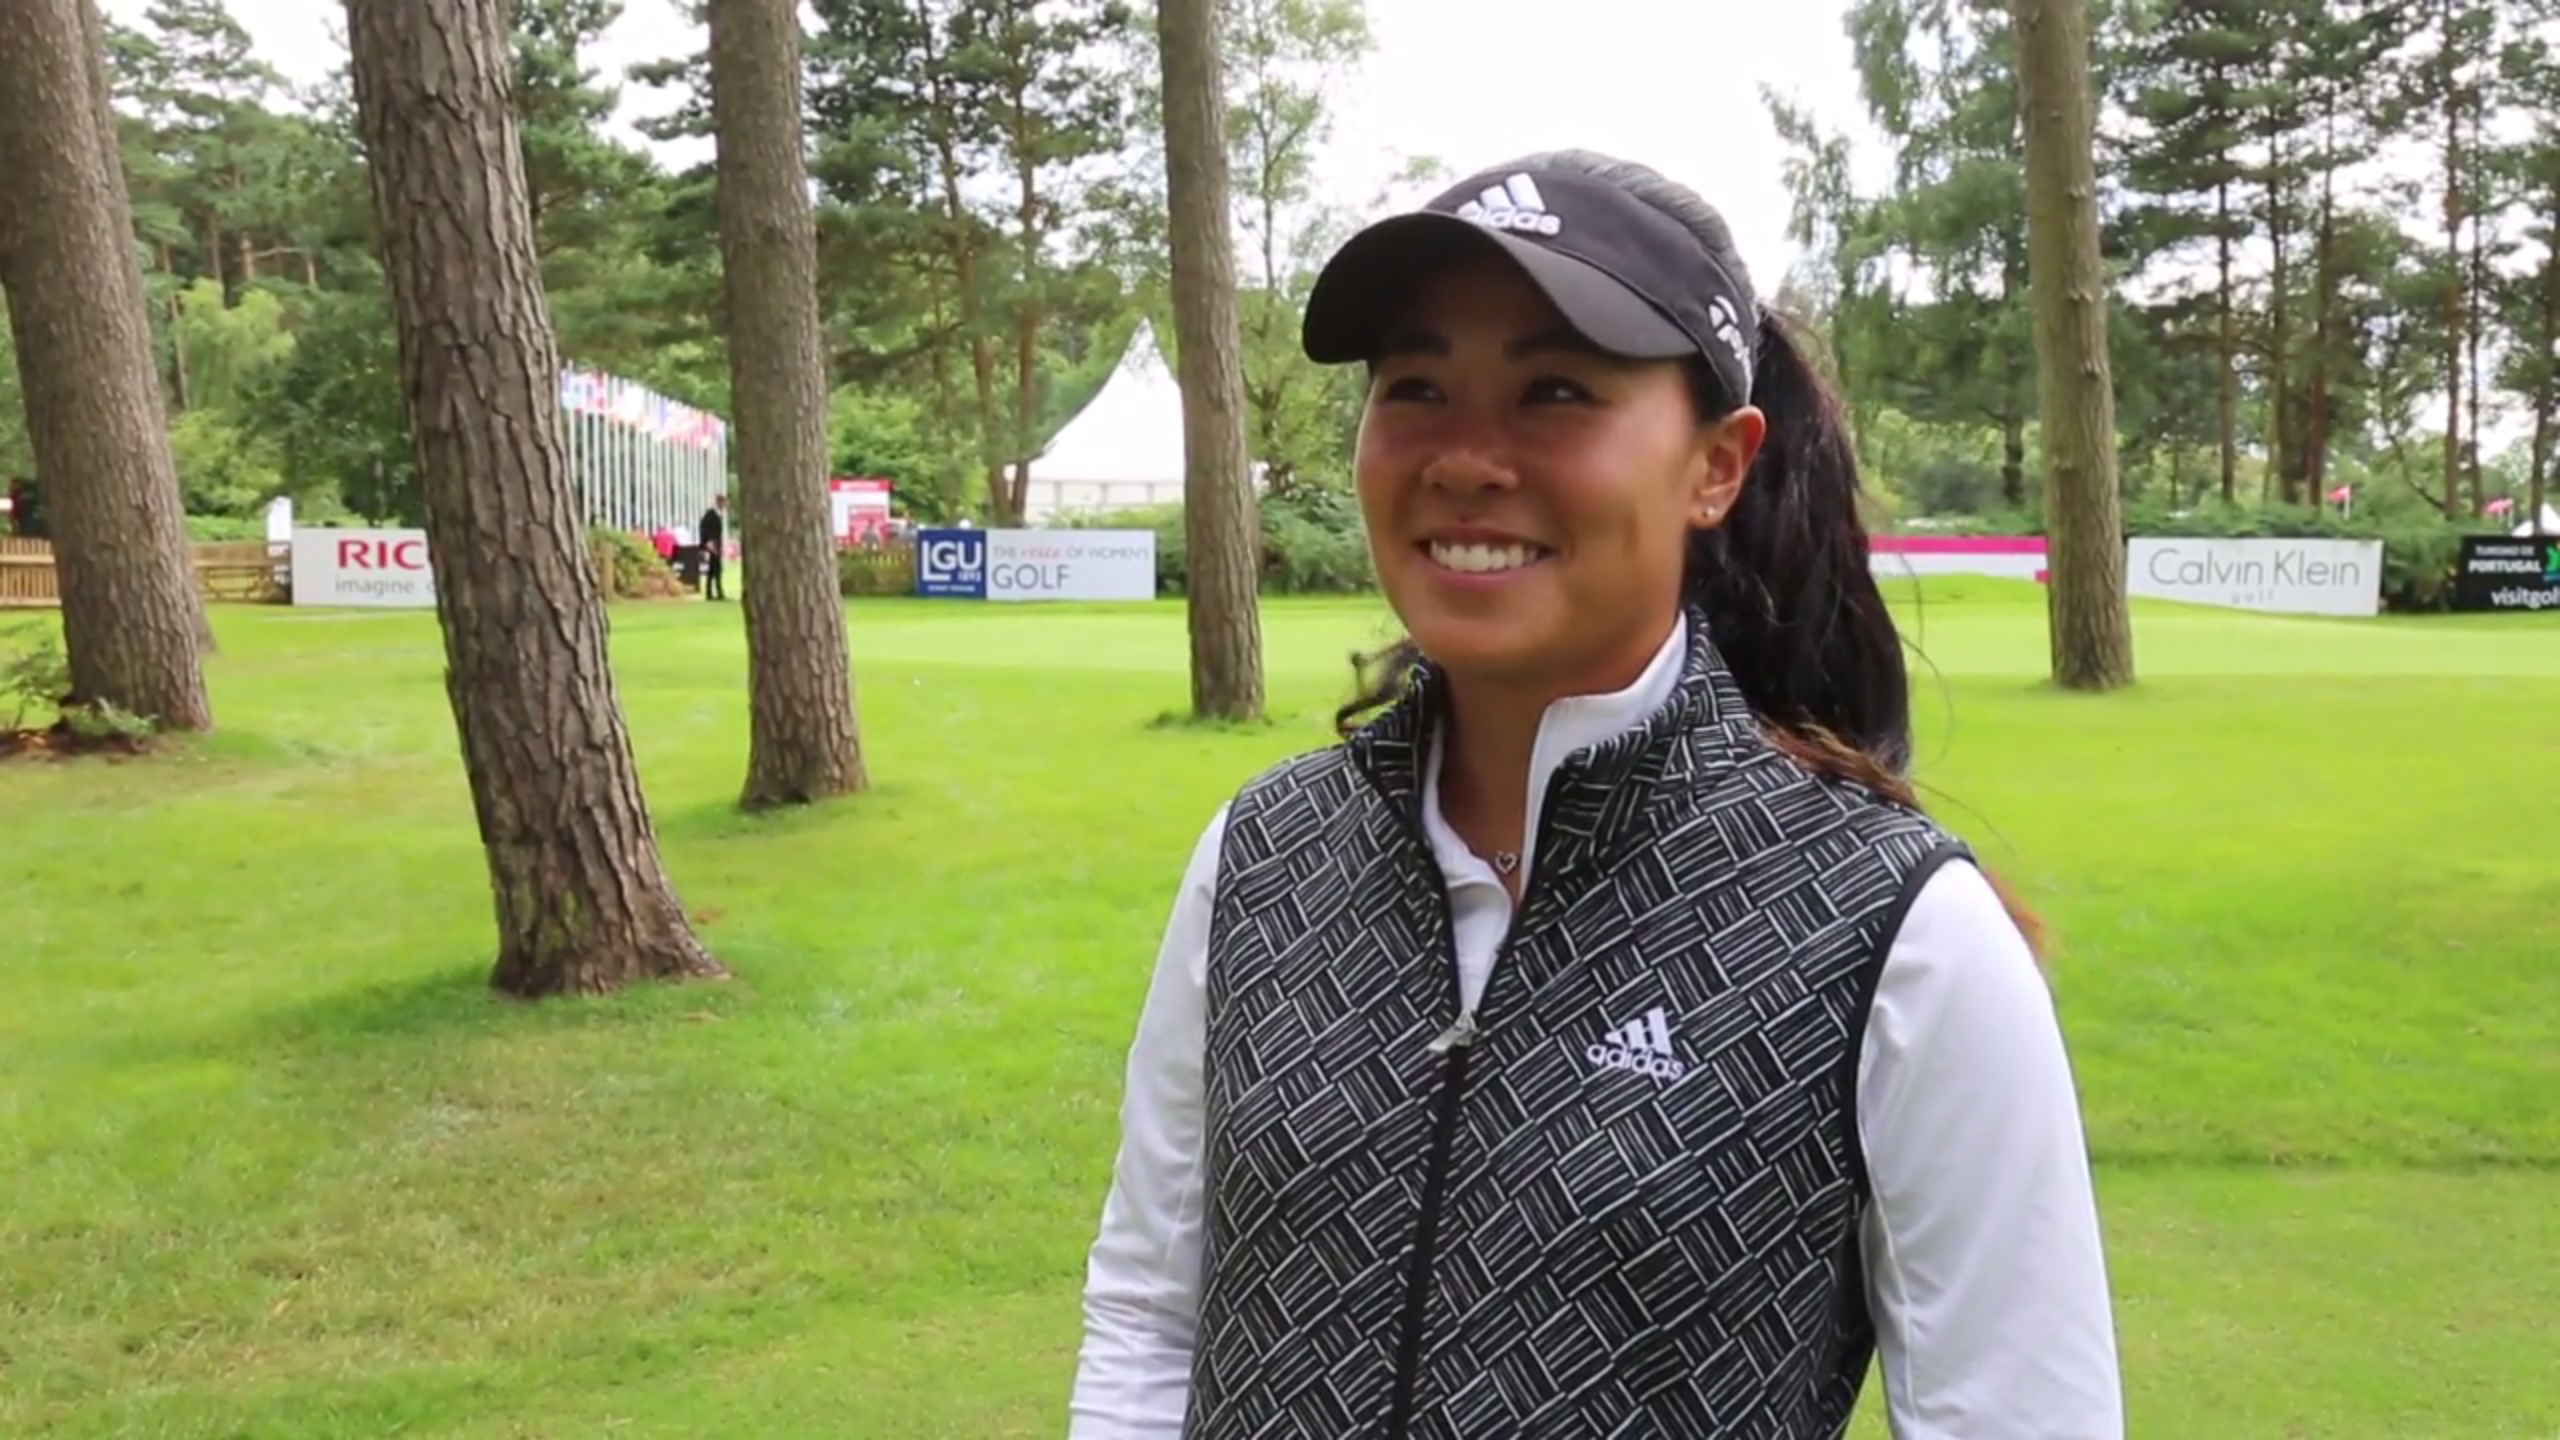 One-on-one: Danielle Kang